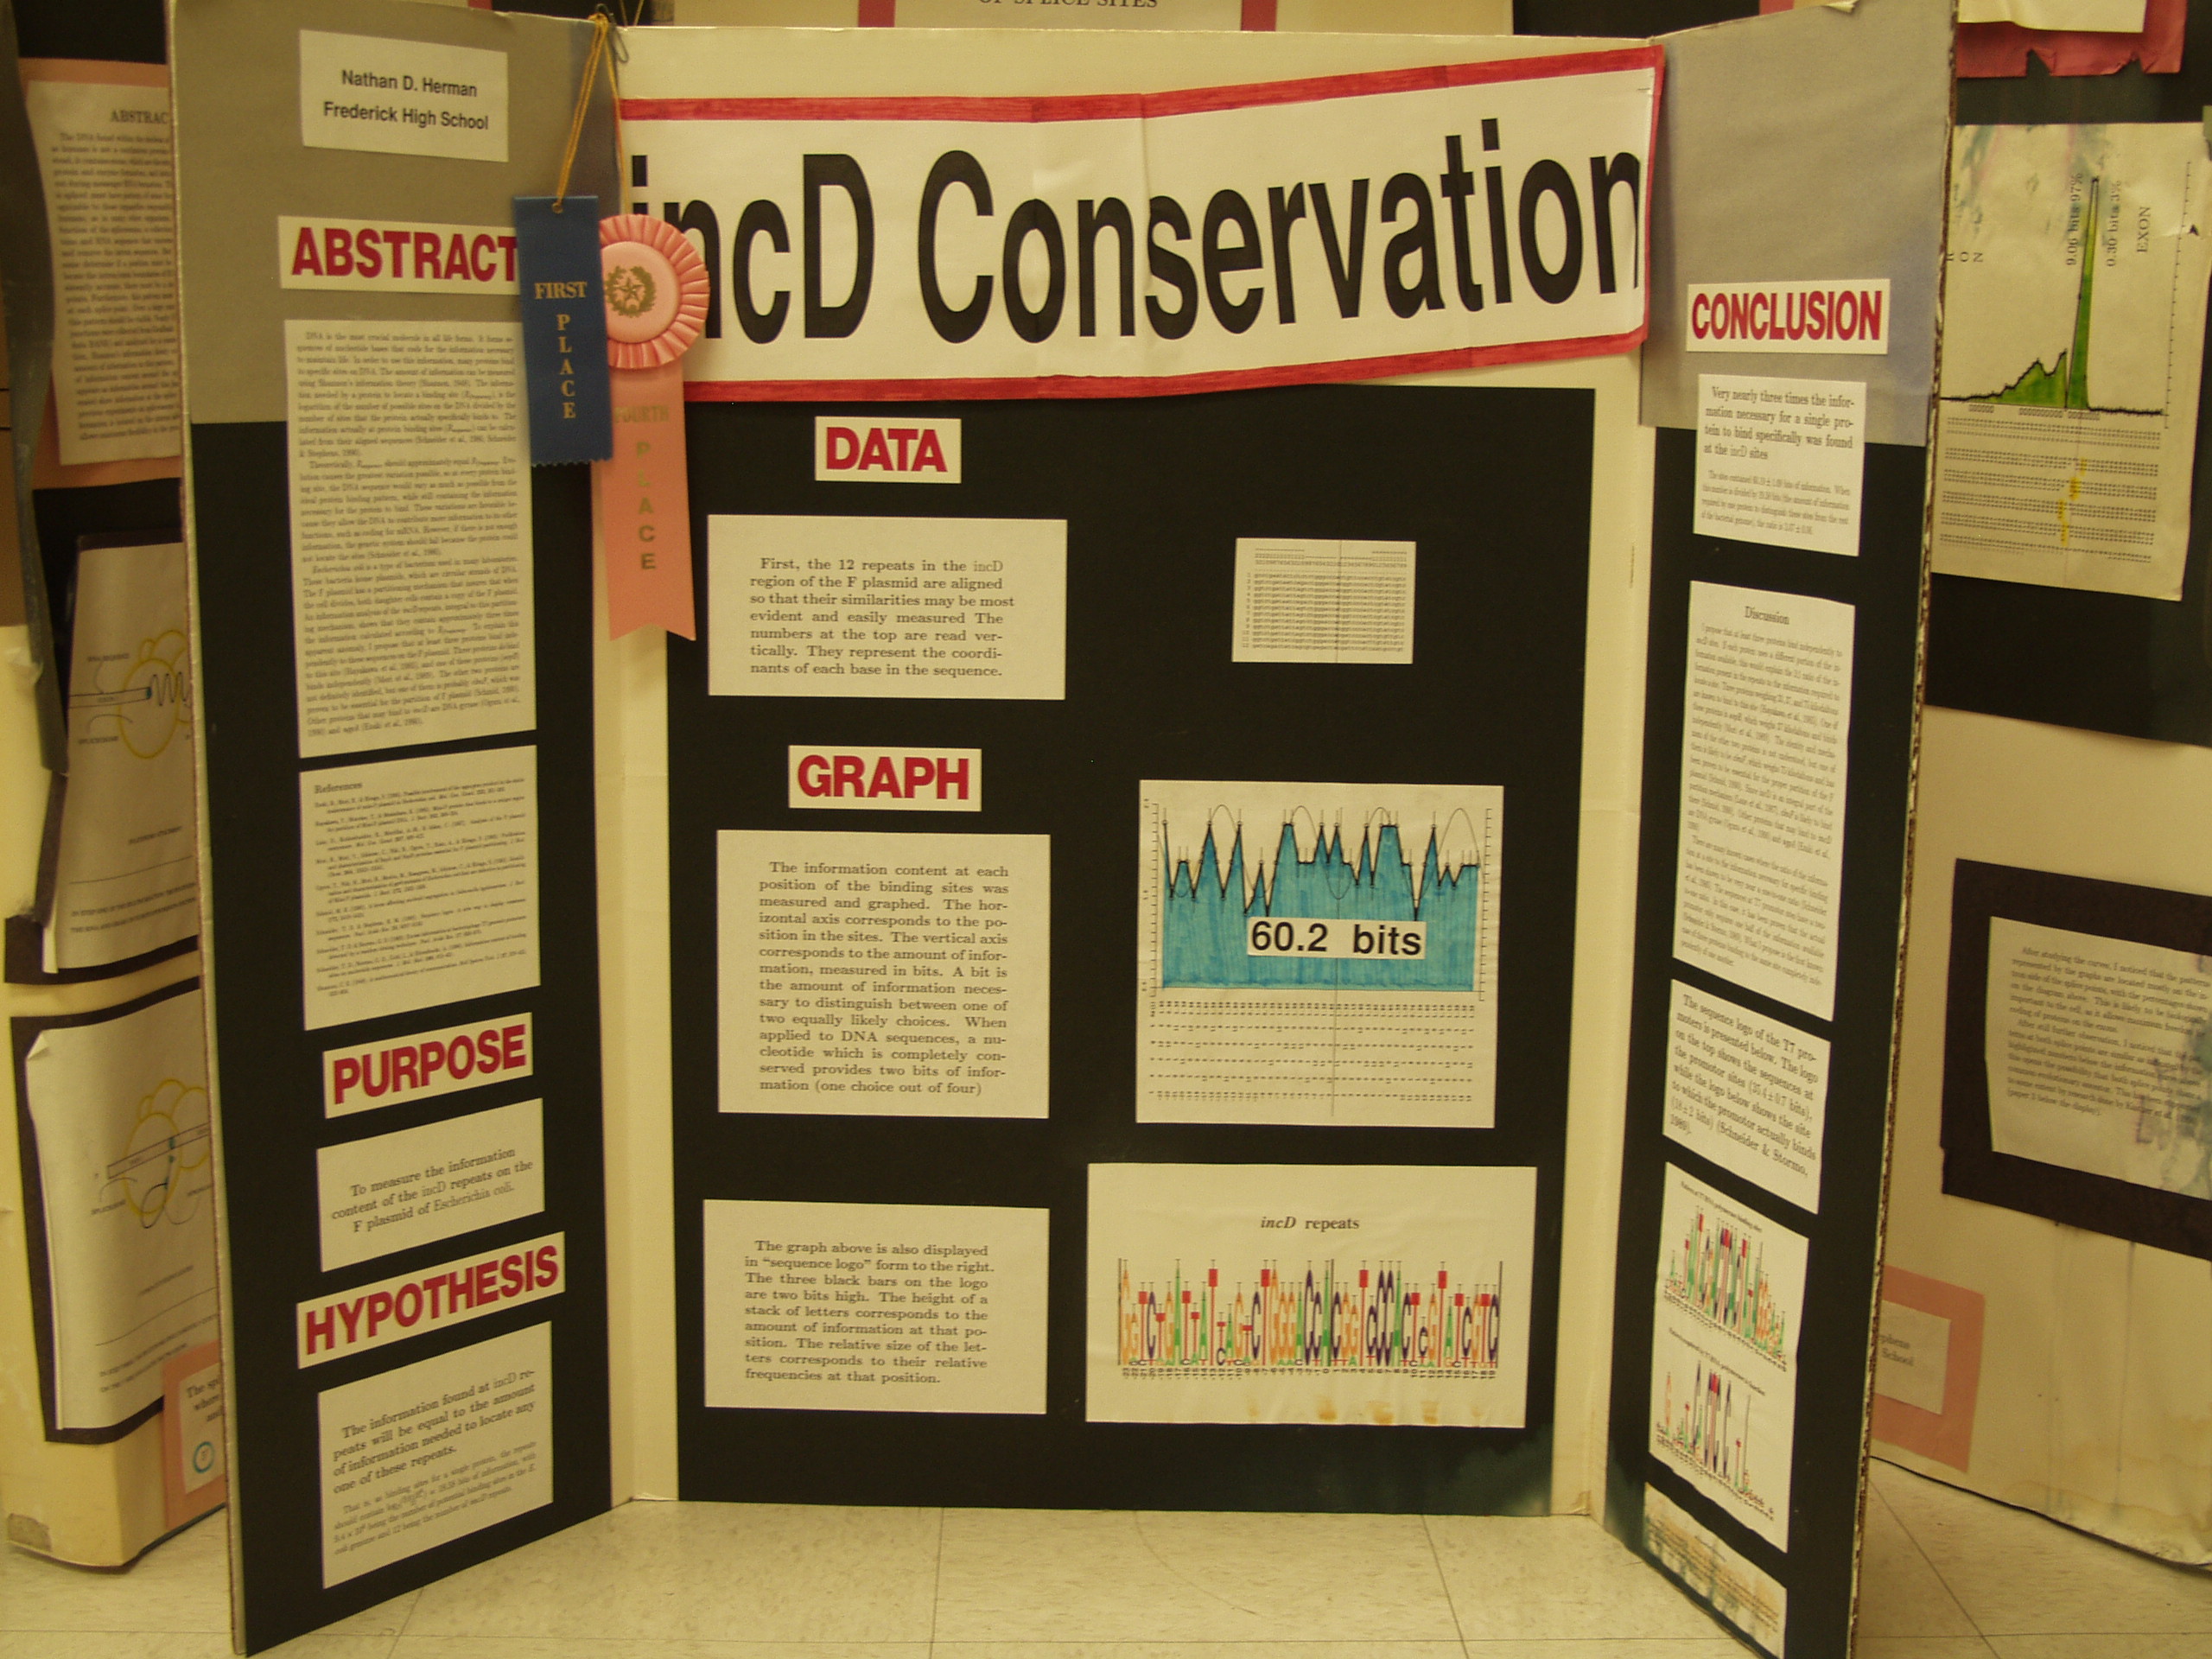 P8237772.JPG Photograph of Nathan Herman's 1991 science fair poster 'incD Conservation'